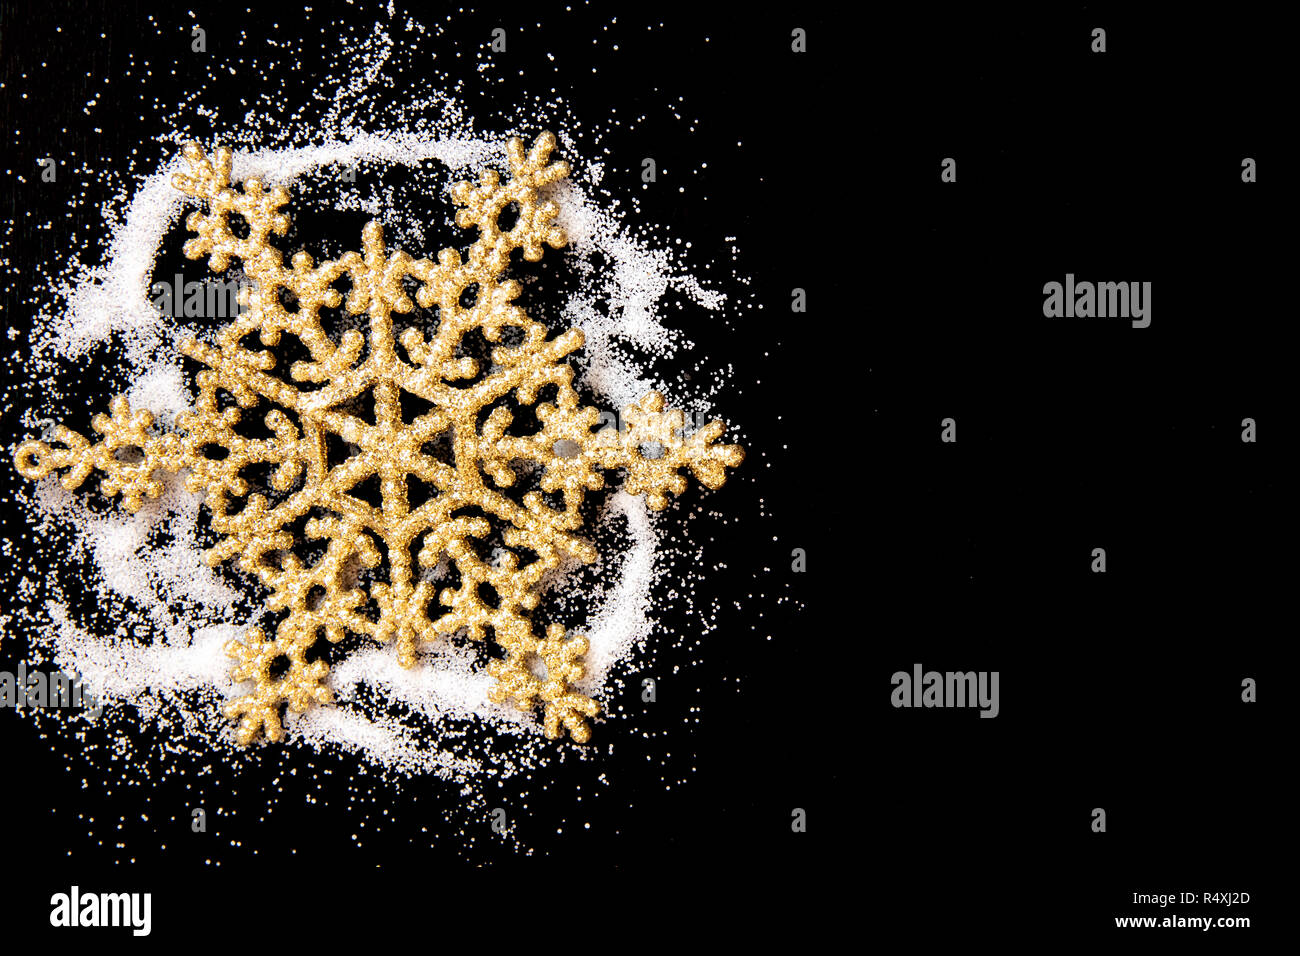 Snow white salt powder spot cloud on left side on black background. Golden snowflake toy. New year and Christamas concept with place for text. Copy space. Stock Photo